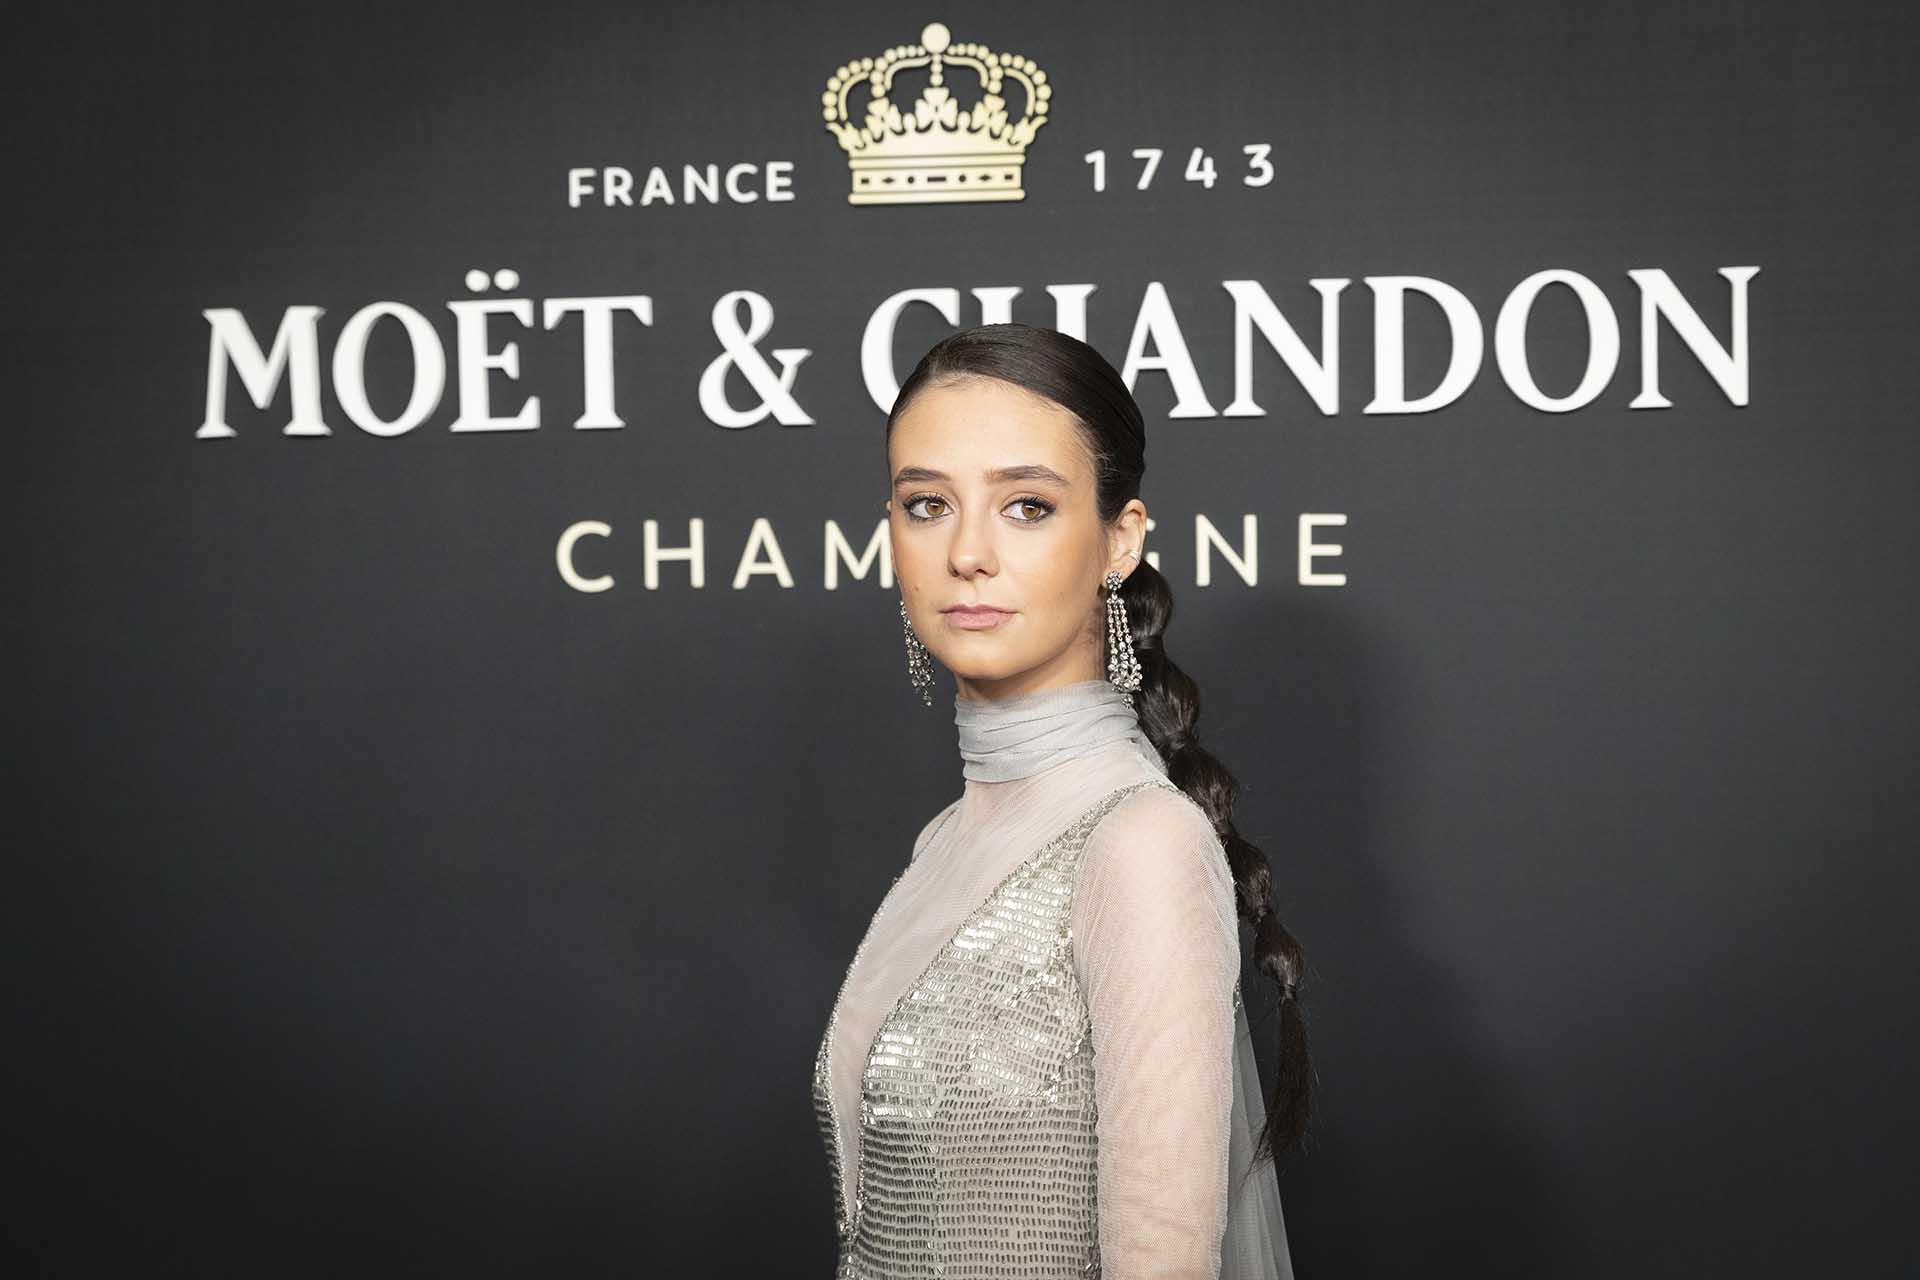 Victoria Federica Marichalar at photocall for Moet Chandon Effervescence event in Madrid on Thursday, 2 December 2021.